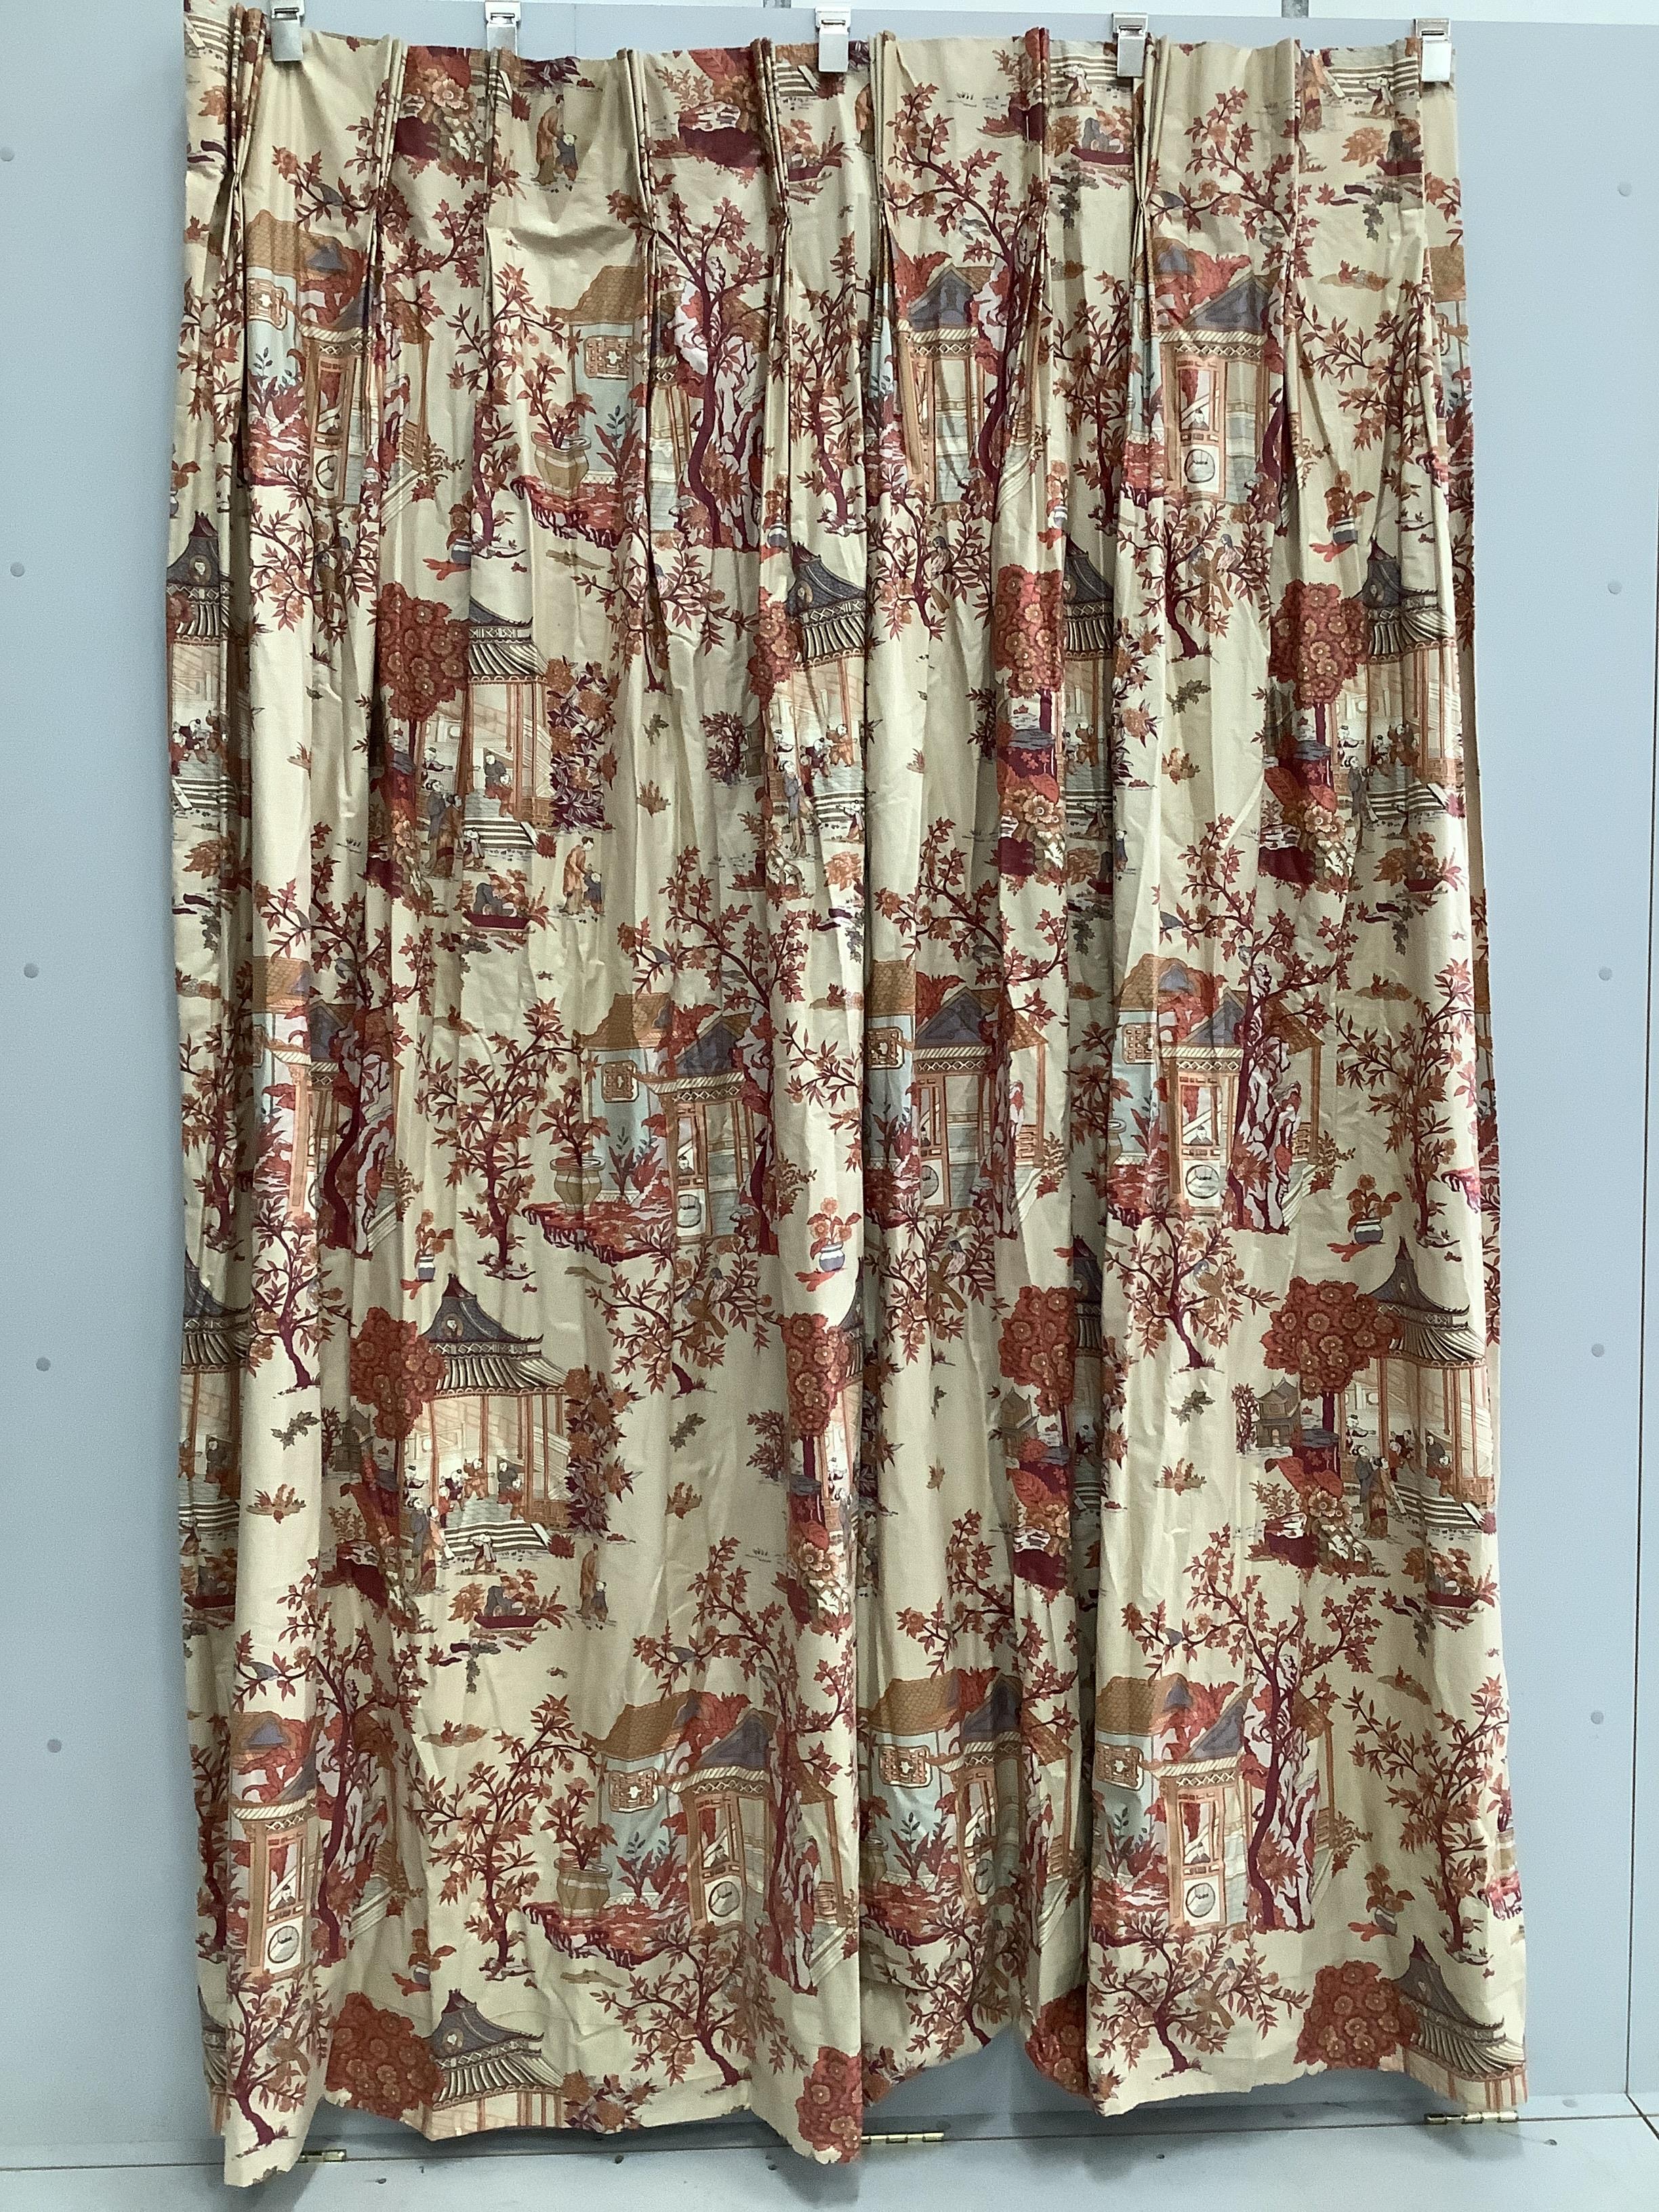 A pair of printed curtains, width at top 140cm, drop 230cm, width at bottom 160cm (all measurements are approximate)